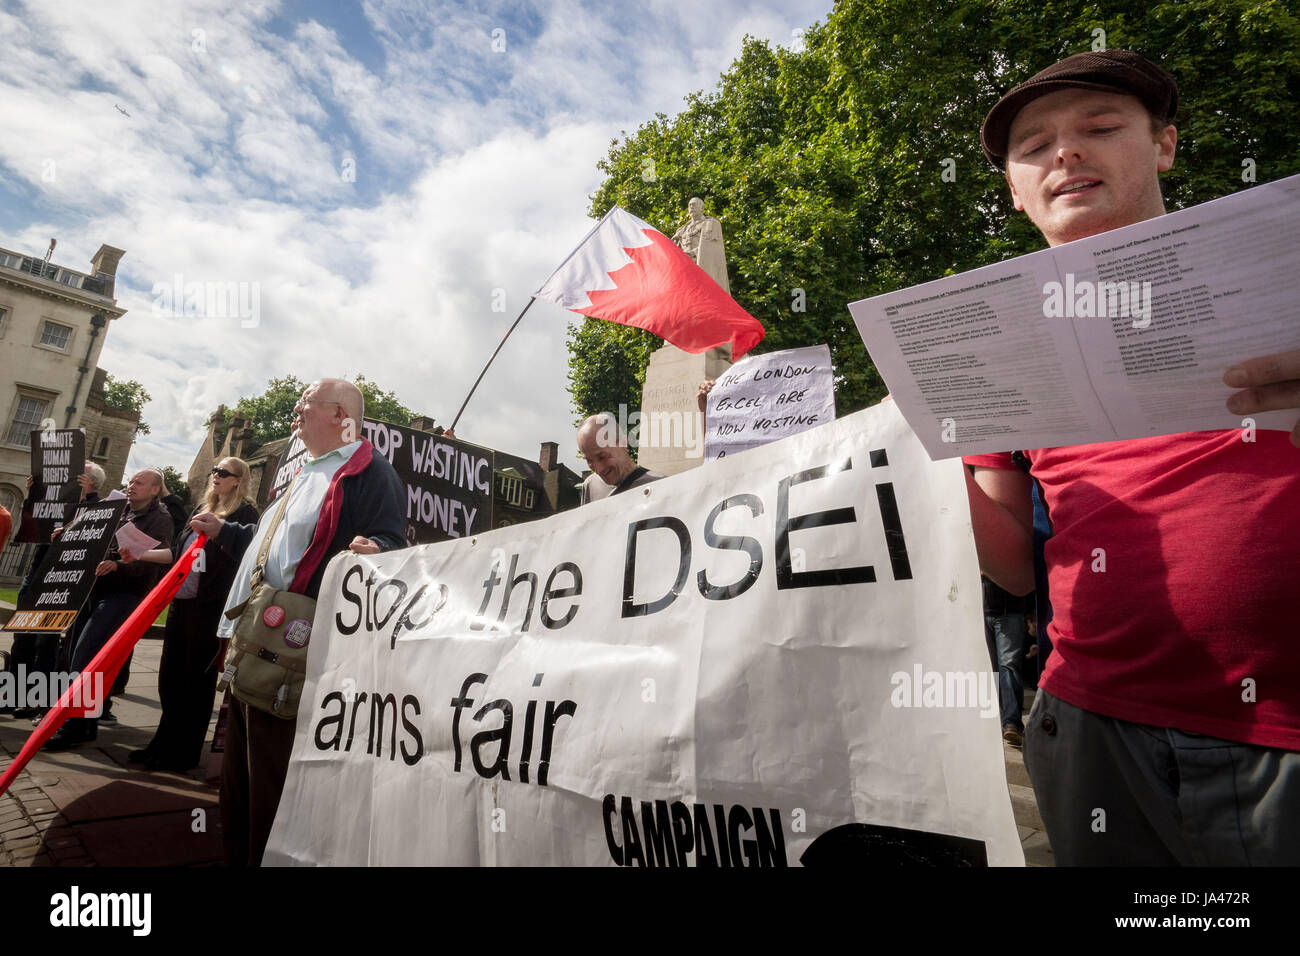 Stop the Arms Fair. Anti-war protesters outside Parliament Buildings in London, UK. Stock Photo